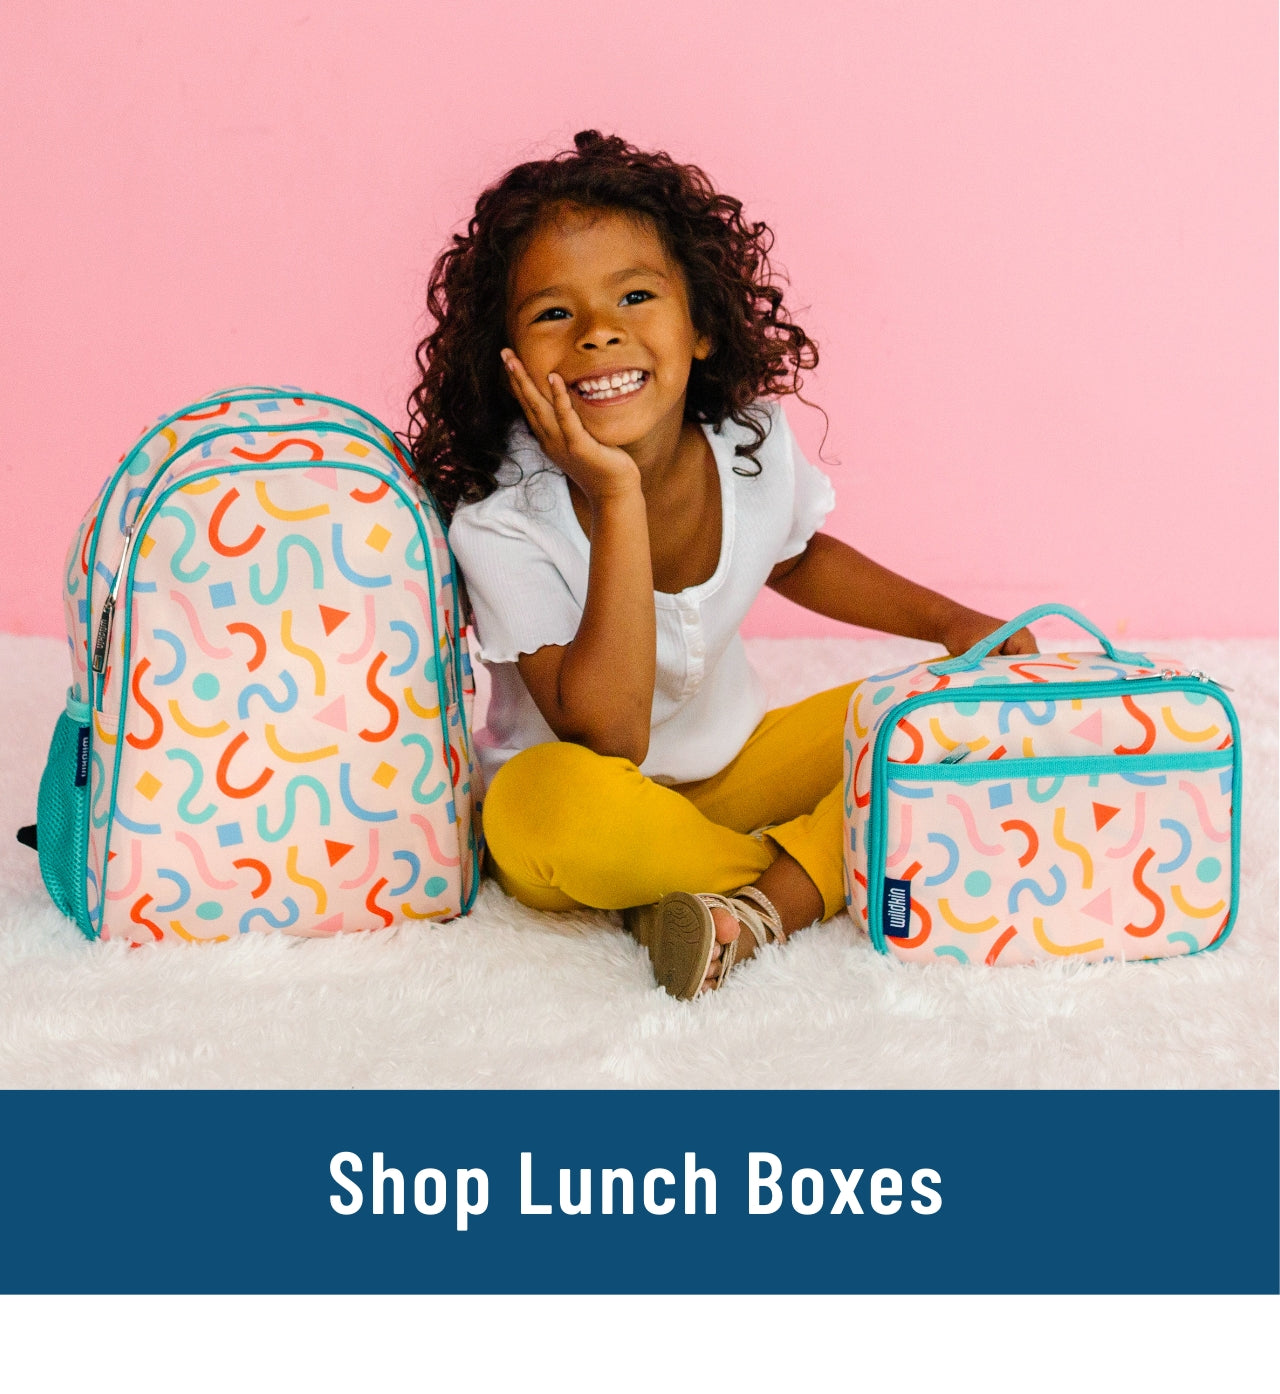 Link to shop lunch boxes. Image of girl sitting on floor with confetti peach backpack and lunch box.